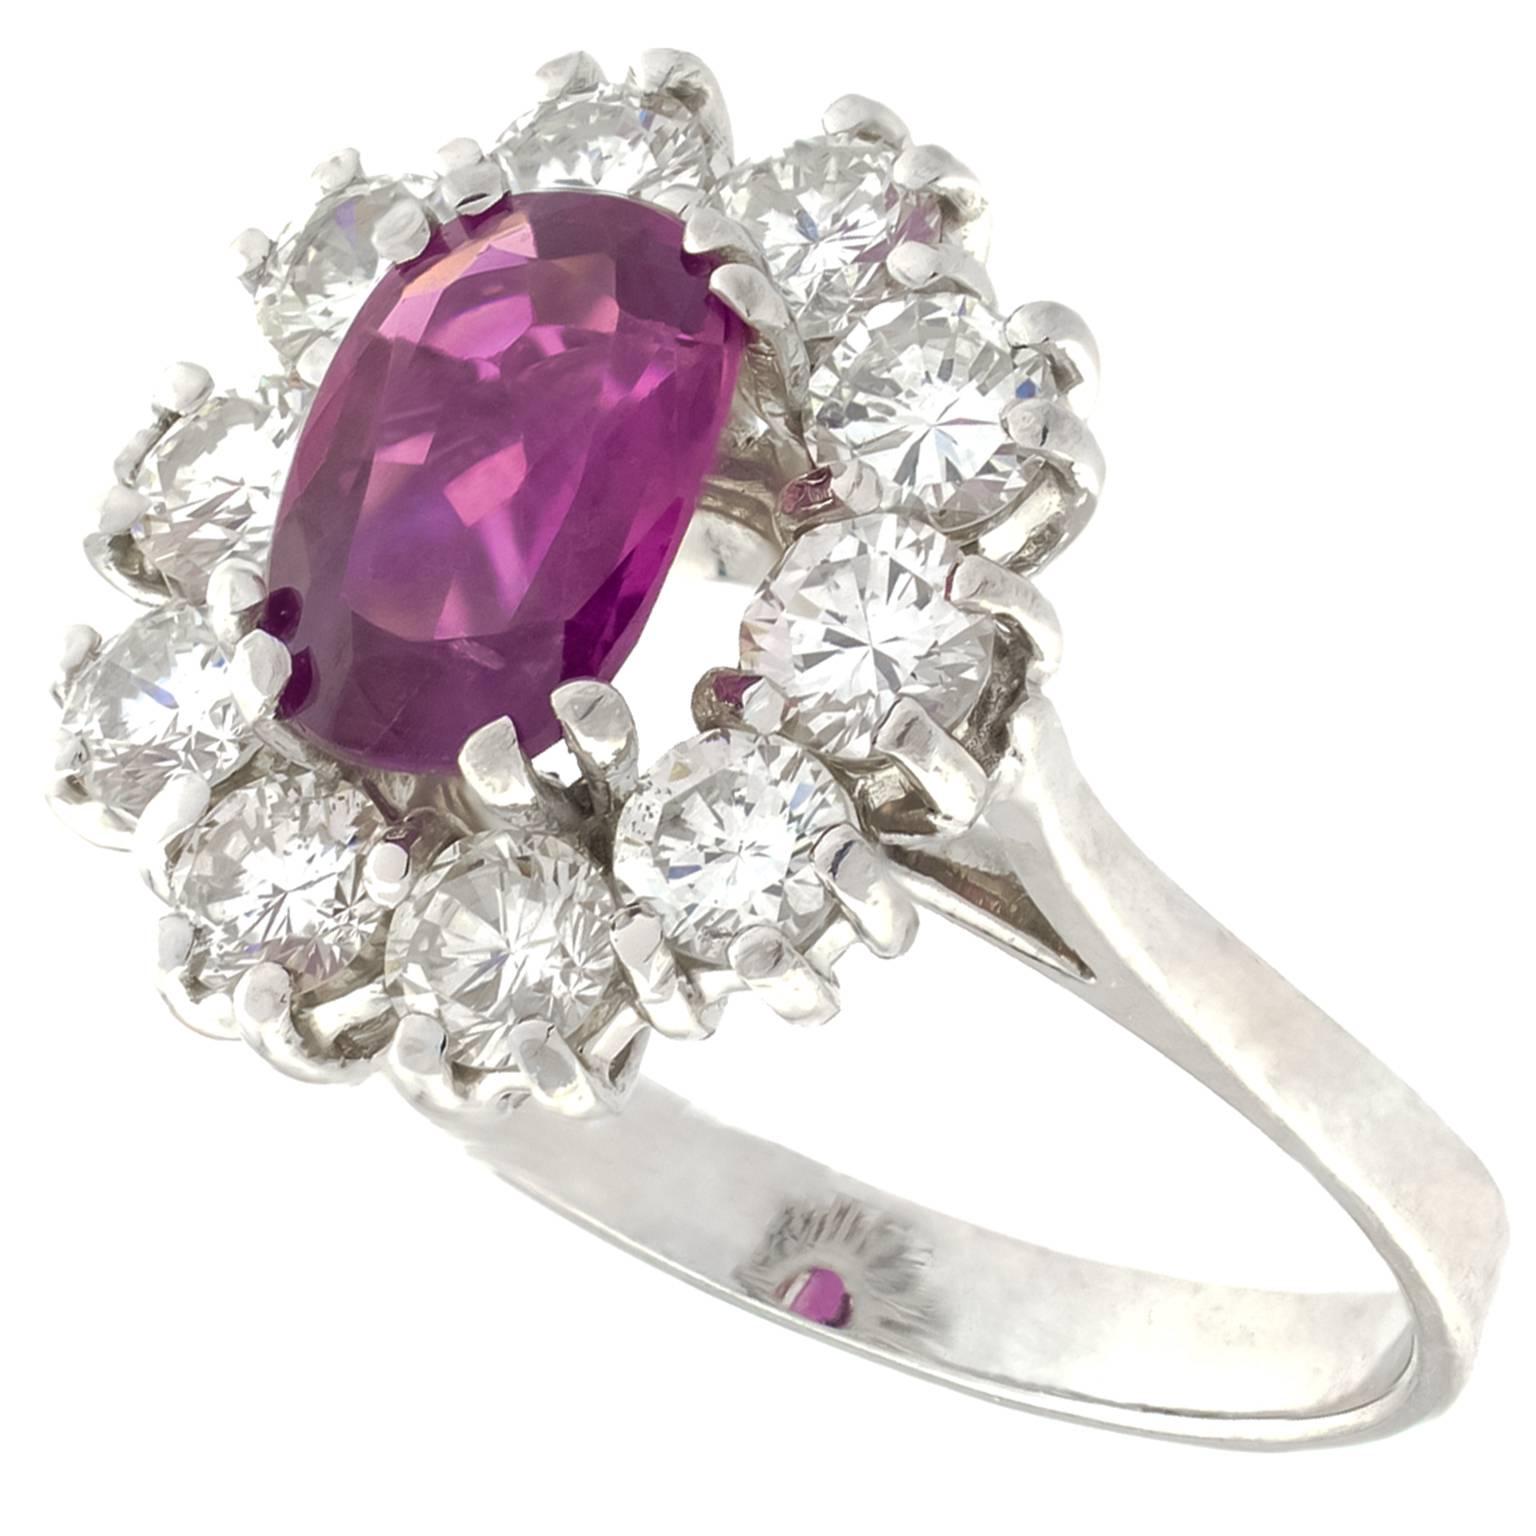 White gold ring centered by an oval cut pink sapphire with a weight of 0.75 carats, surrounded by 10 round brilliant cut diamonds, totalling 1.50 carats.
Size:  Swiss 13, French 53, US 6 1/2
Can besized